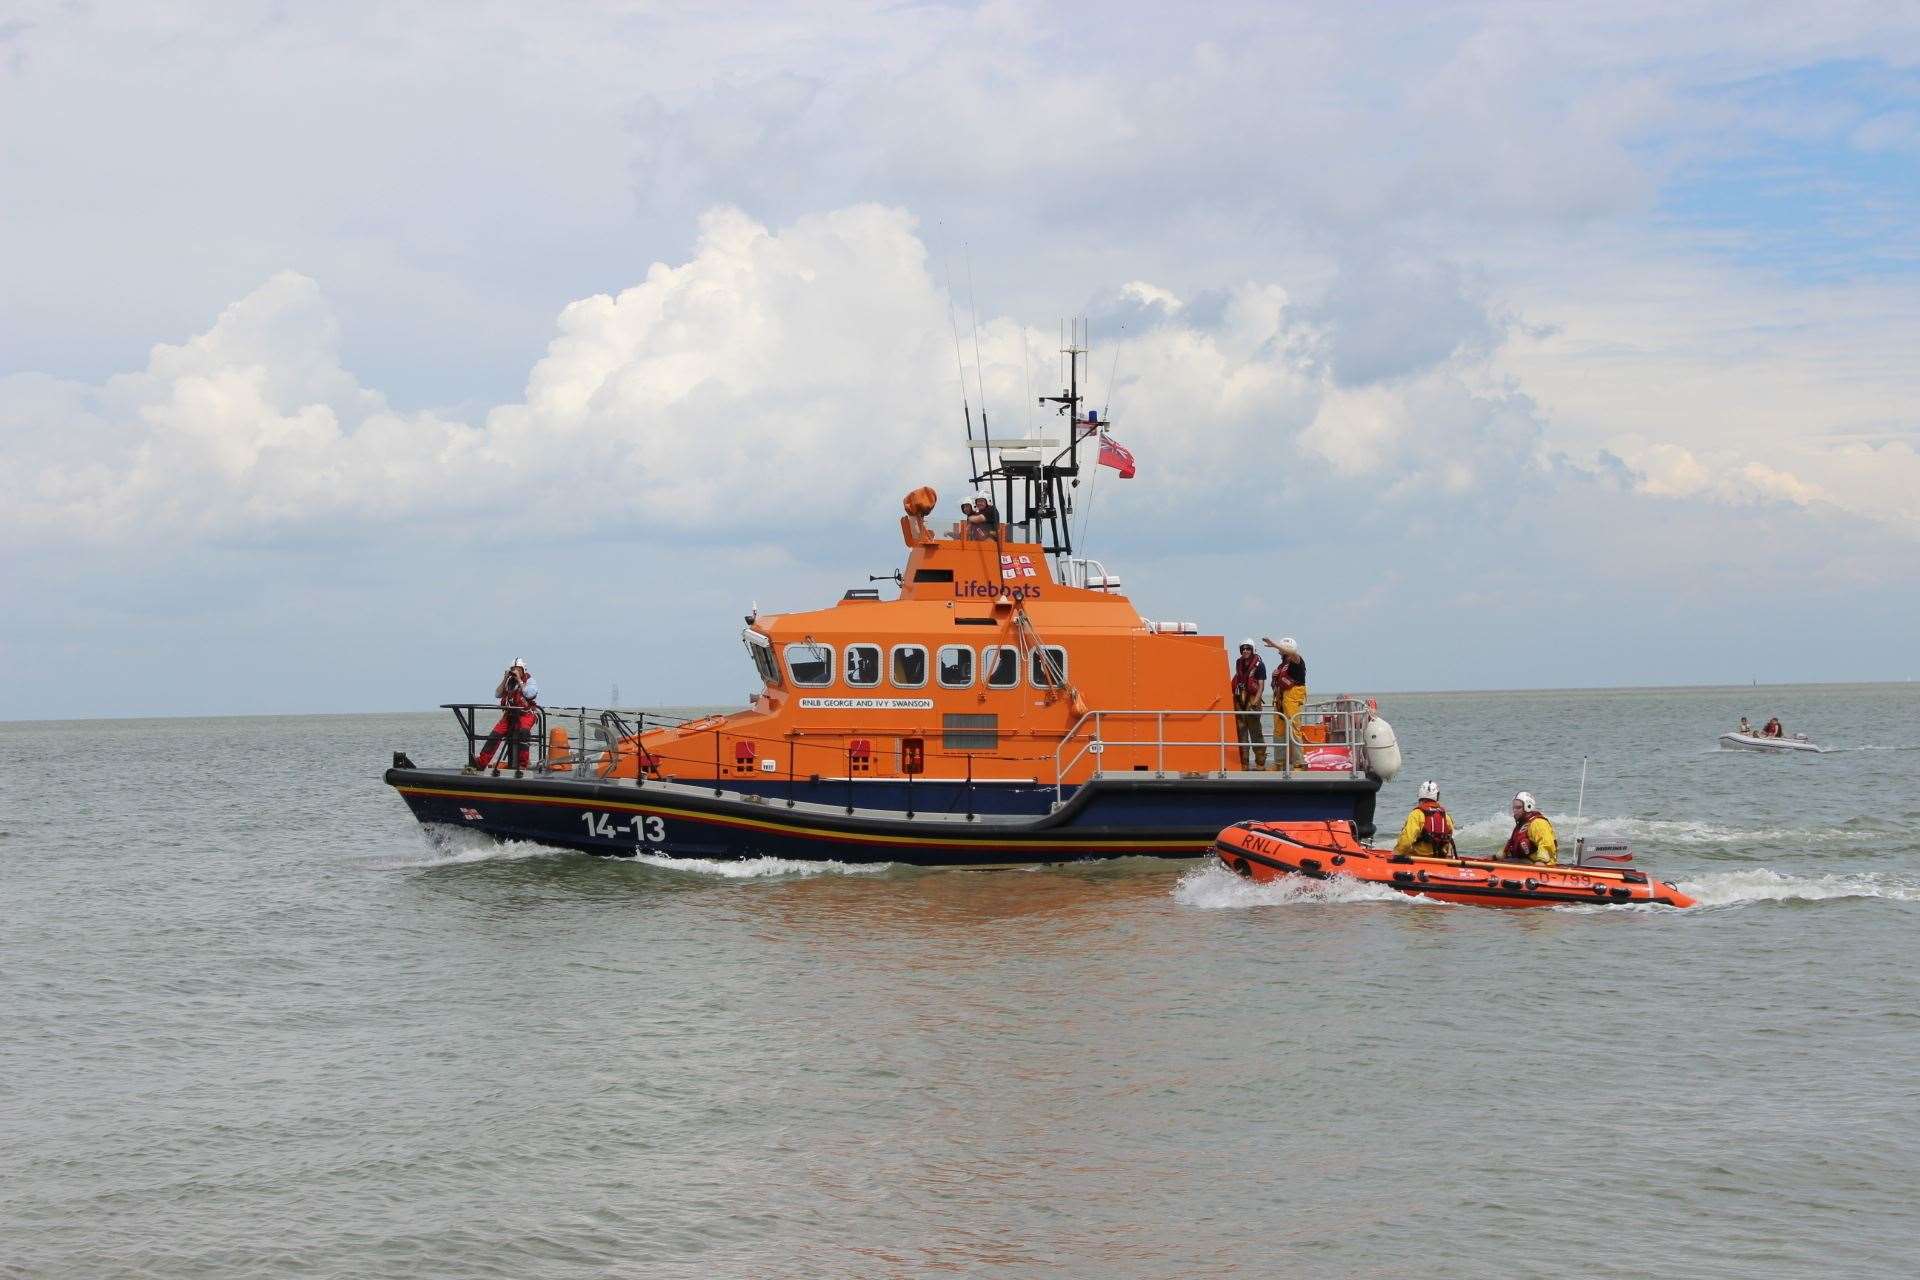 The Sheerness lifeboat has noted a large number of avoidable incidents since lockdown eased